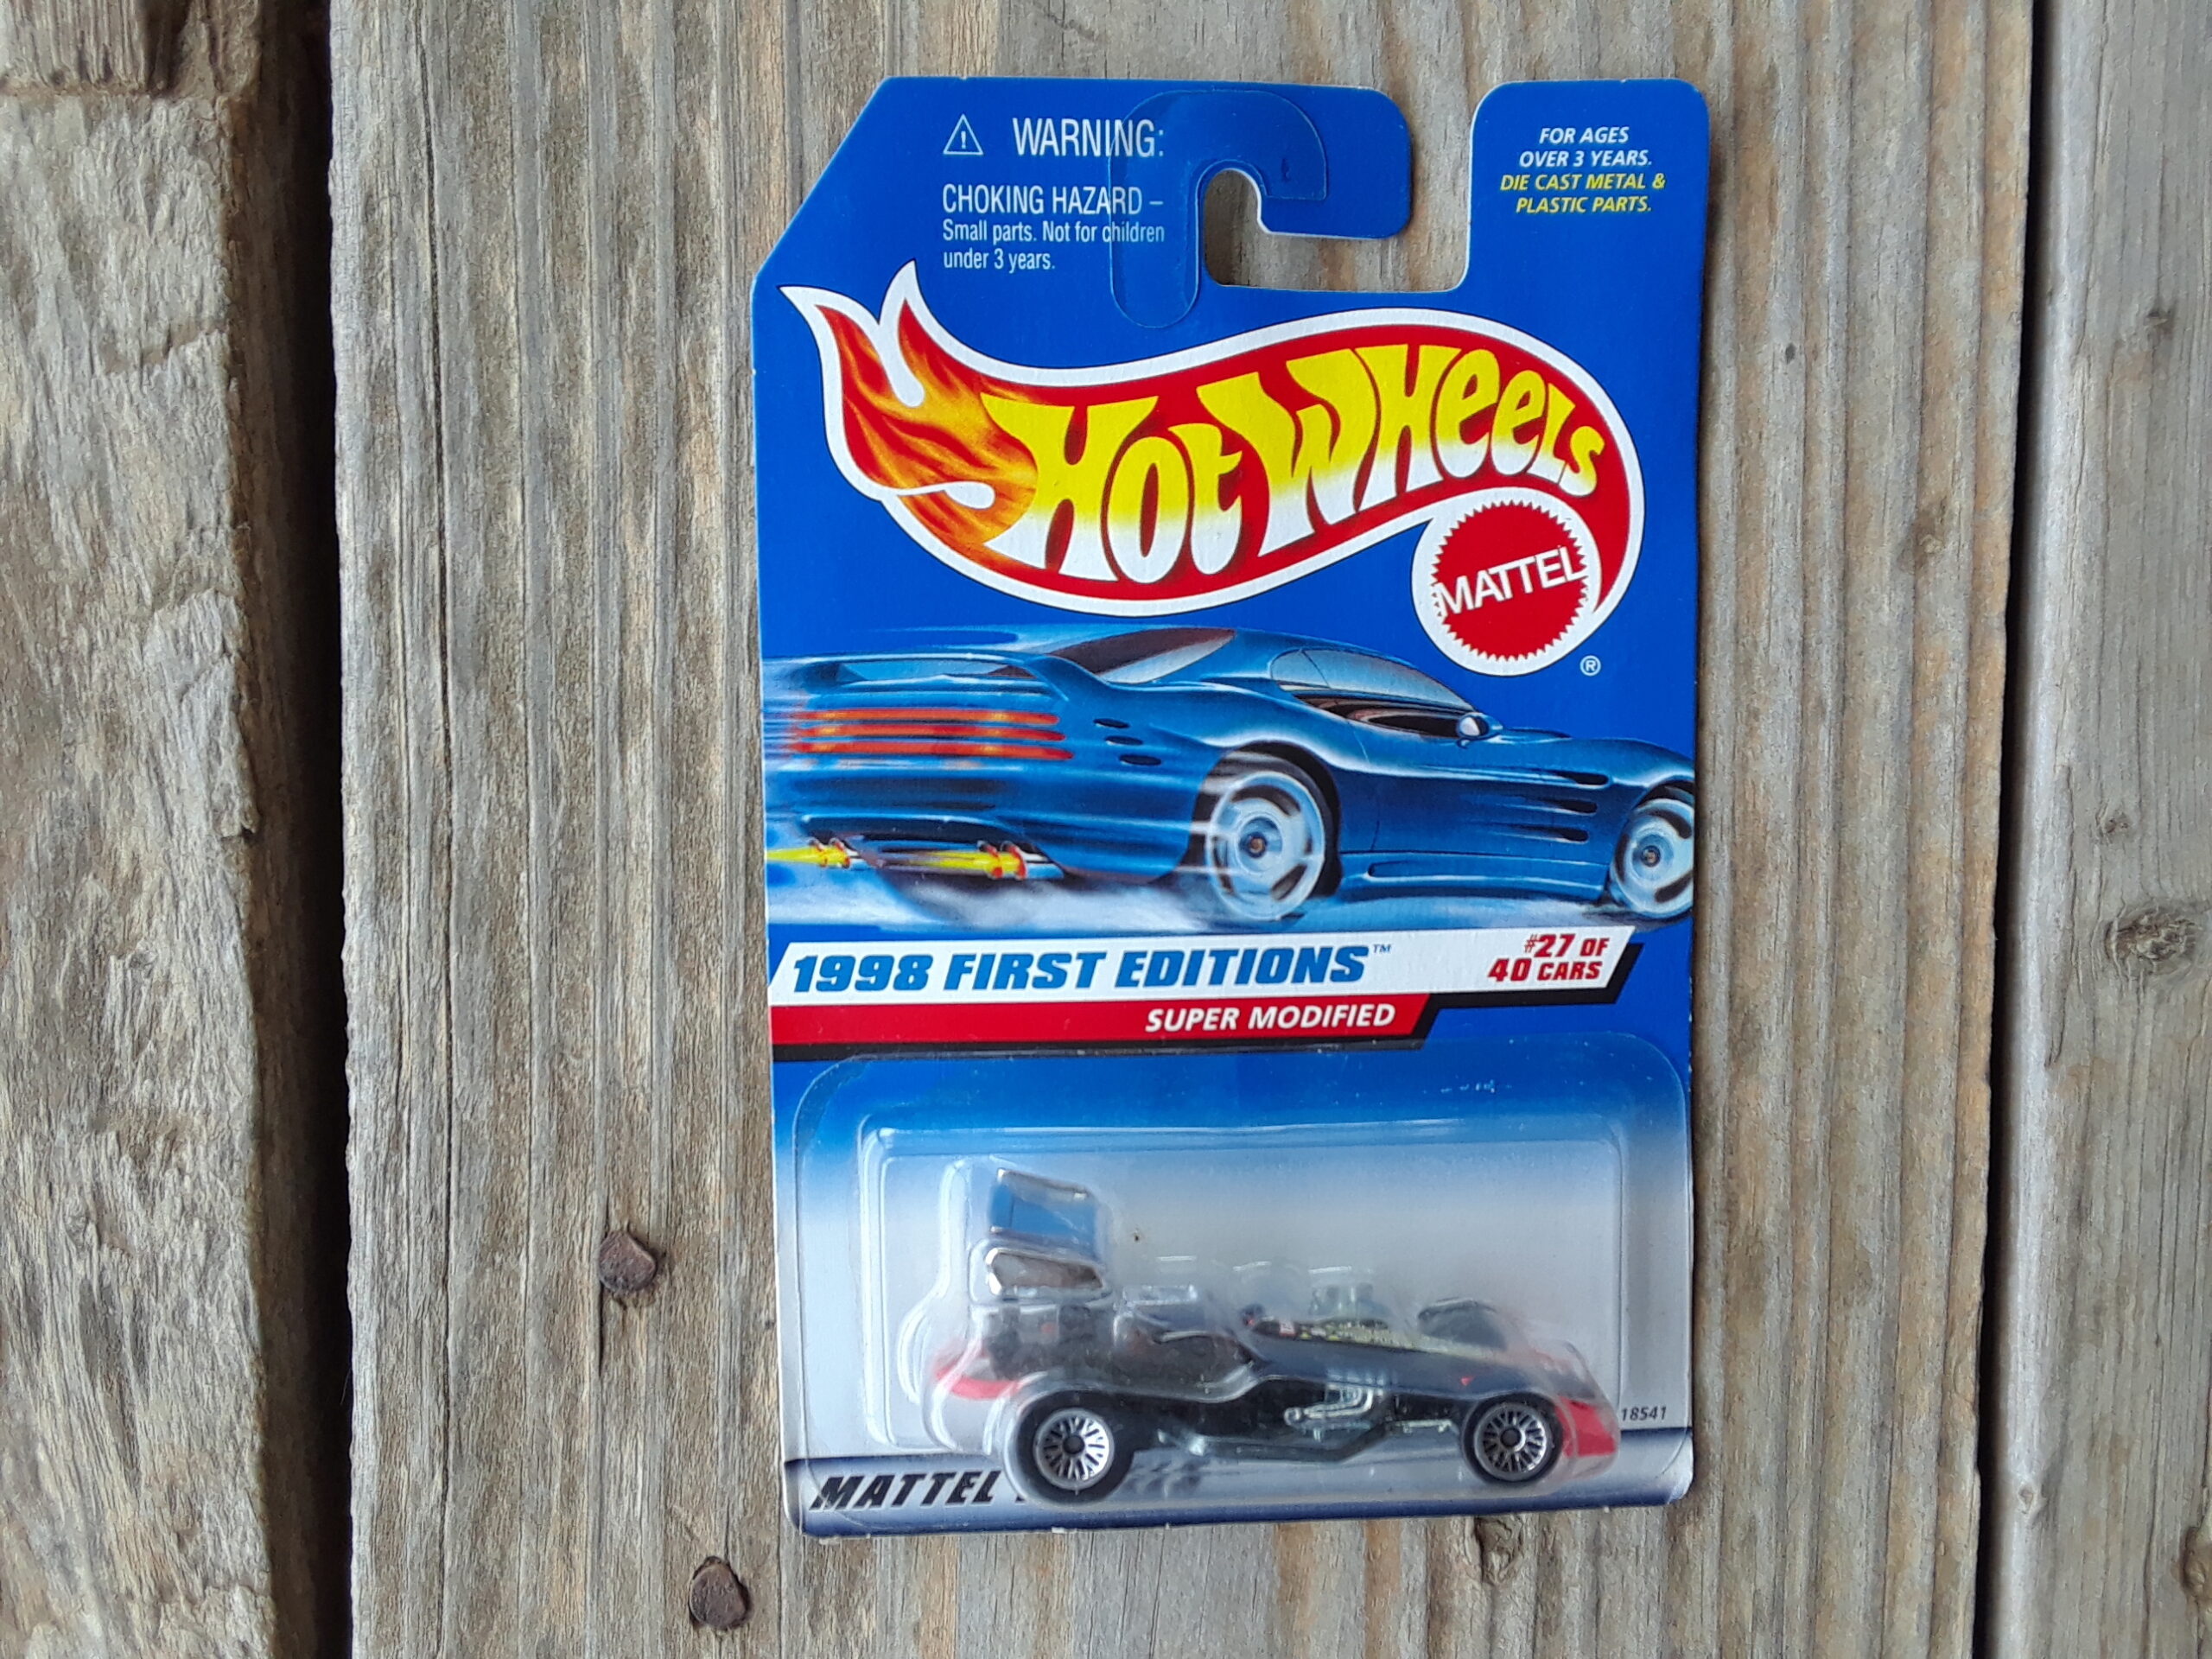 Hot Wheels 1998 First Editions Super Modified